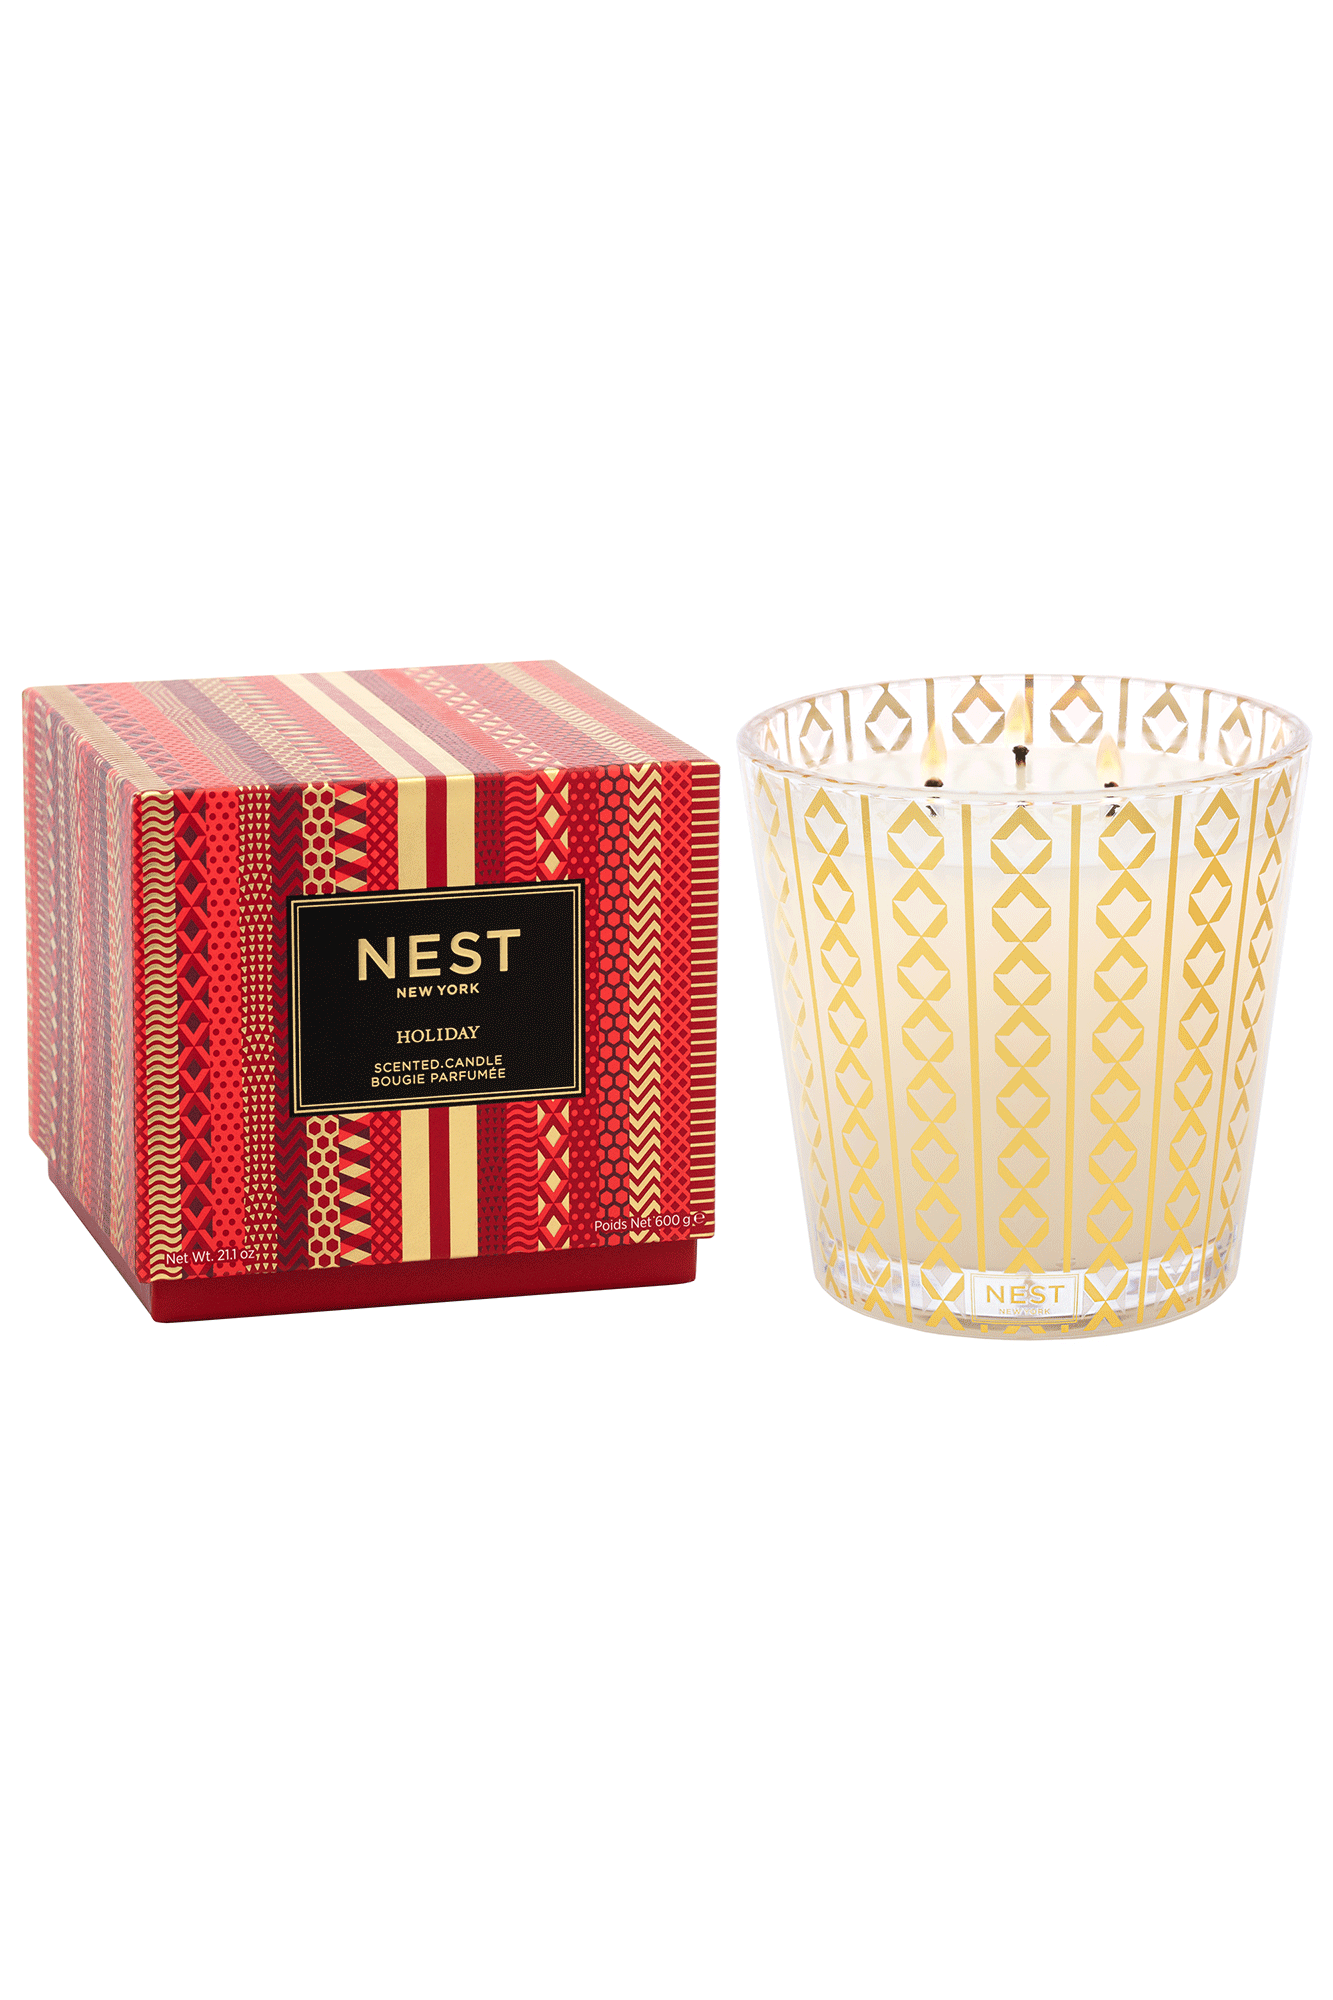 This exquisite Holiday Classic 3 Wick Candle from Nest will fill your home with the quintessential aroma of the season. A sophisticated blend of pomegranate, mandarin orange, pine, cloves, cinnamon, vanilla, and amber, this bestselling fragrance will bring a cozy and warm atmosphere to any room.